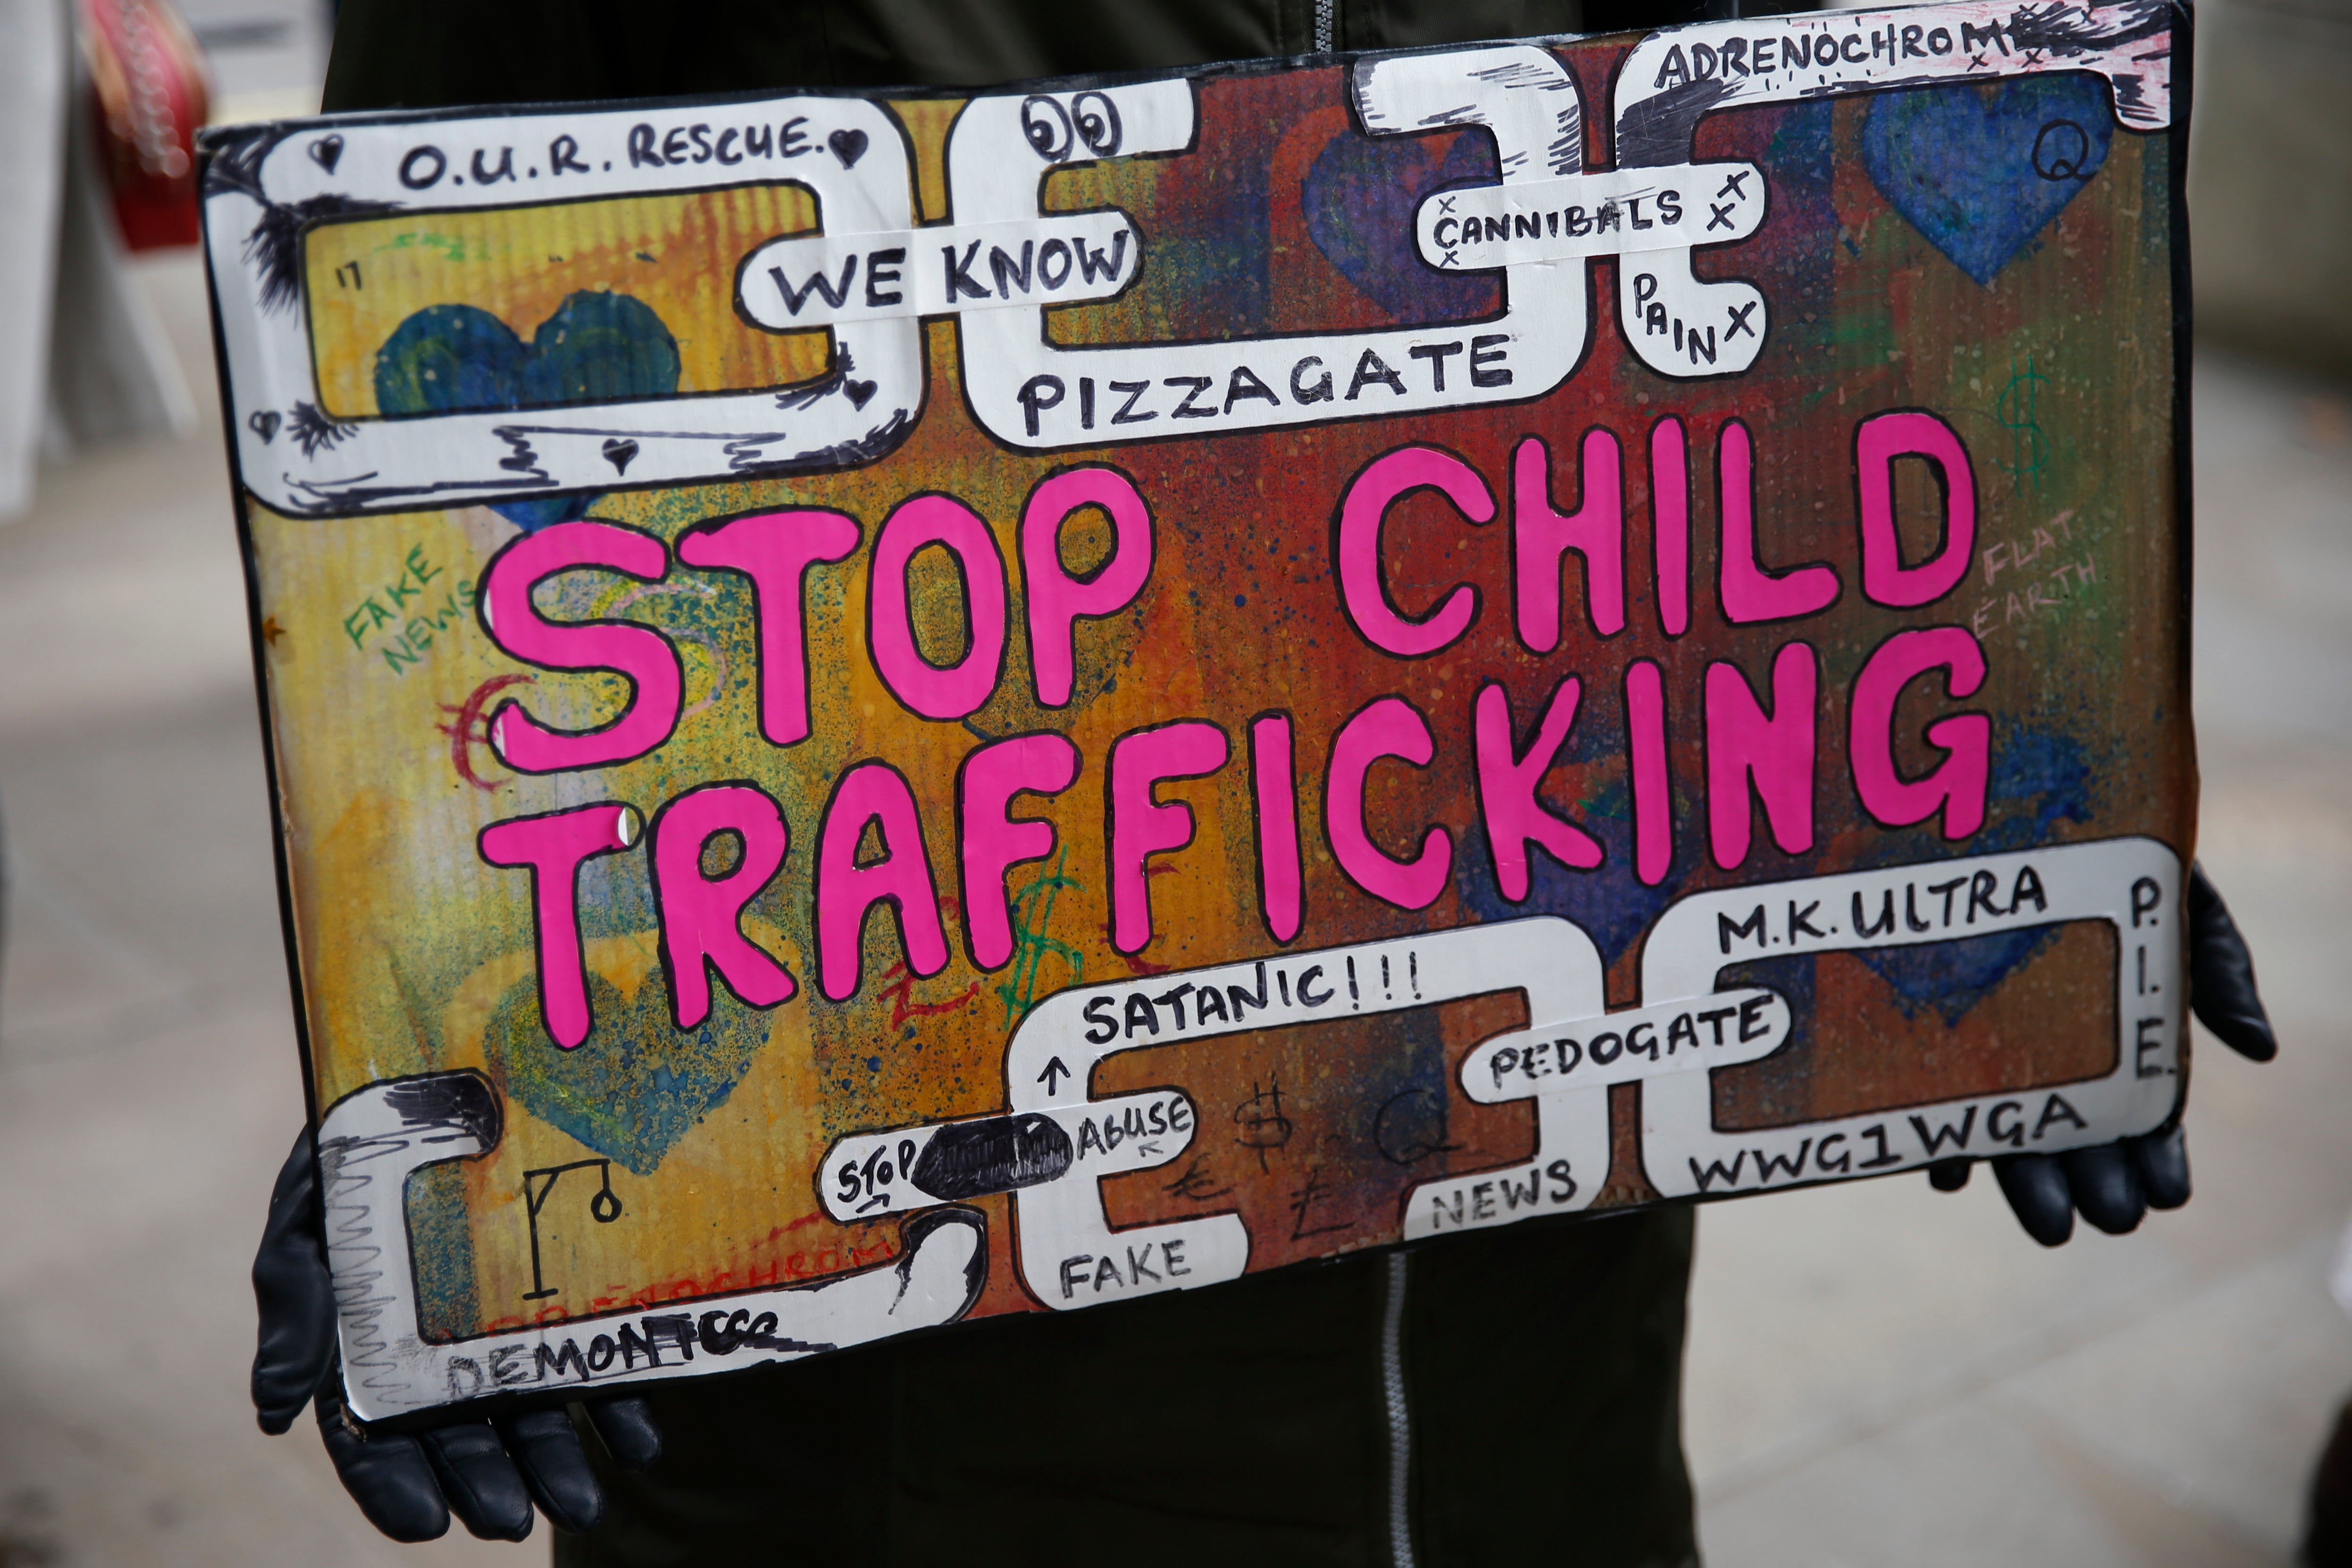 British conspiracy theorists protested outside Downing Street over child trafficking